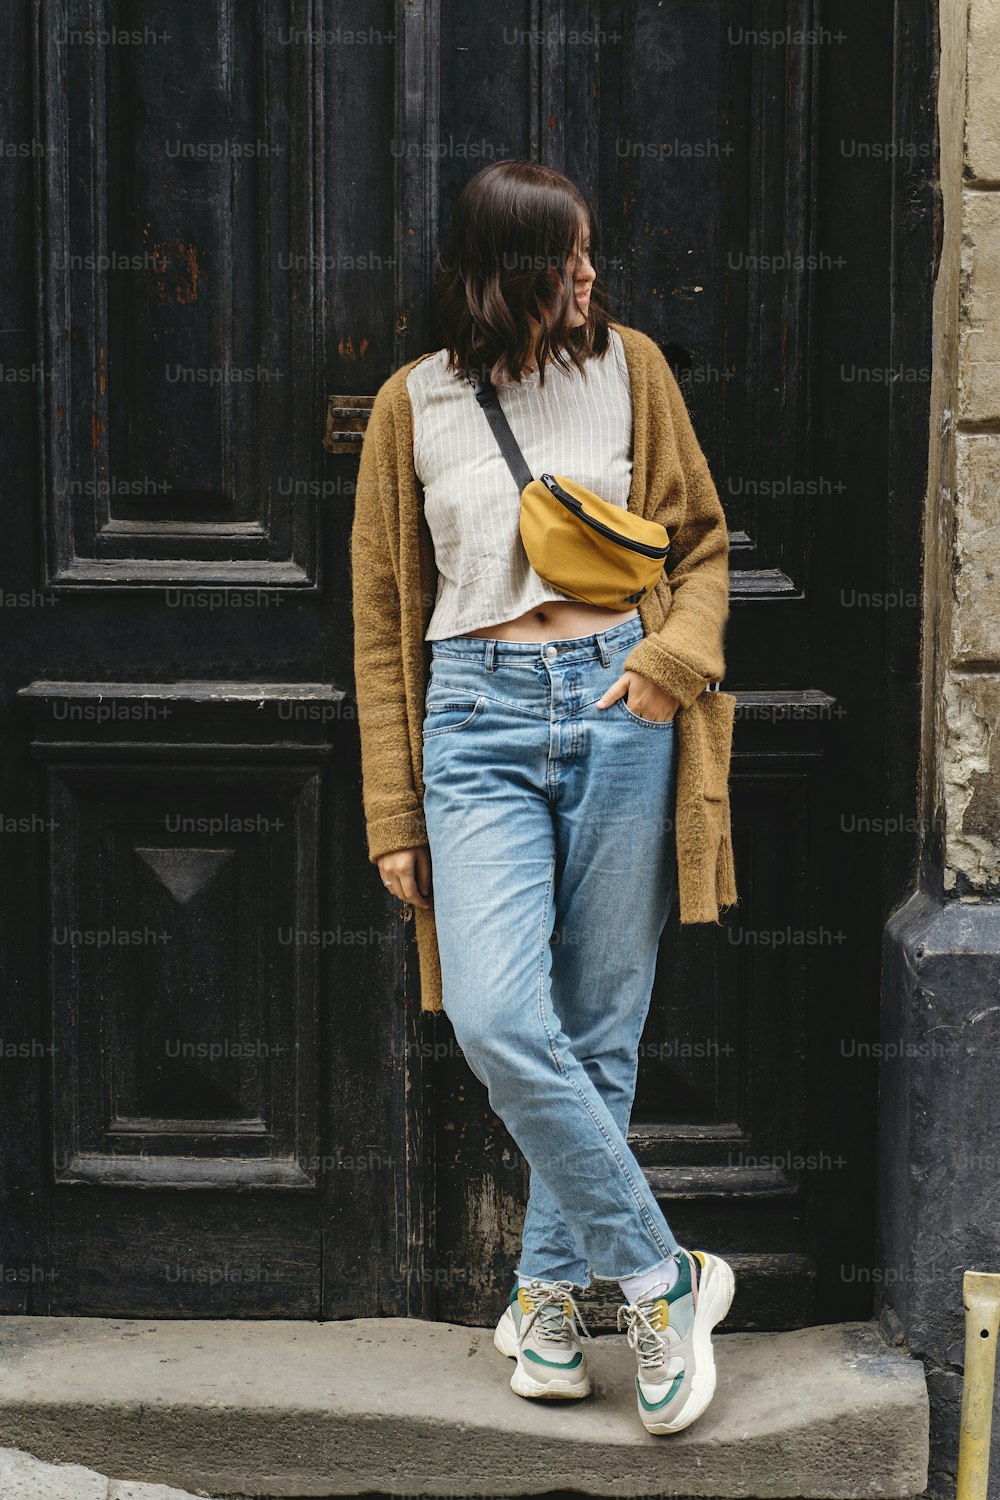 Stylish hipster girl standing at building in european city street. Young woman in casual fashionable outfit posing at old wooden door. Alone leisure activity in city